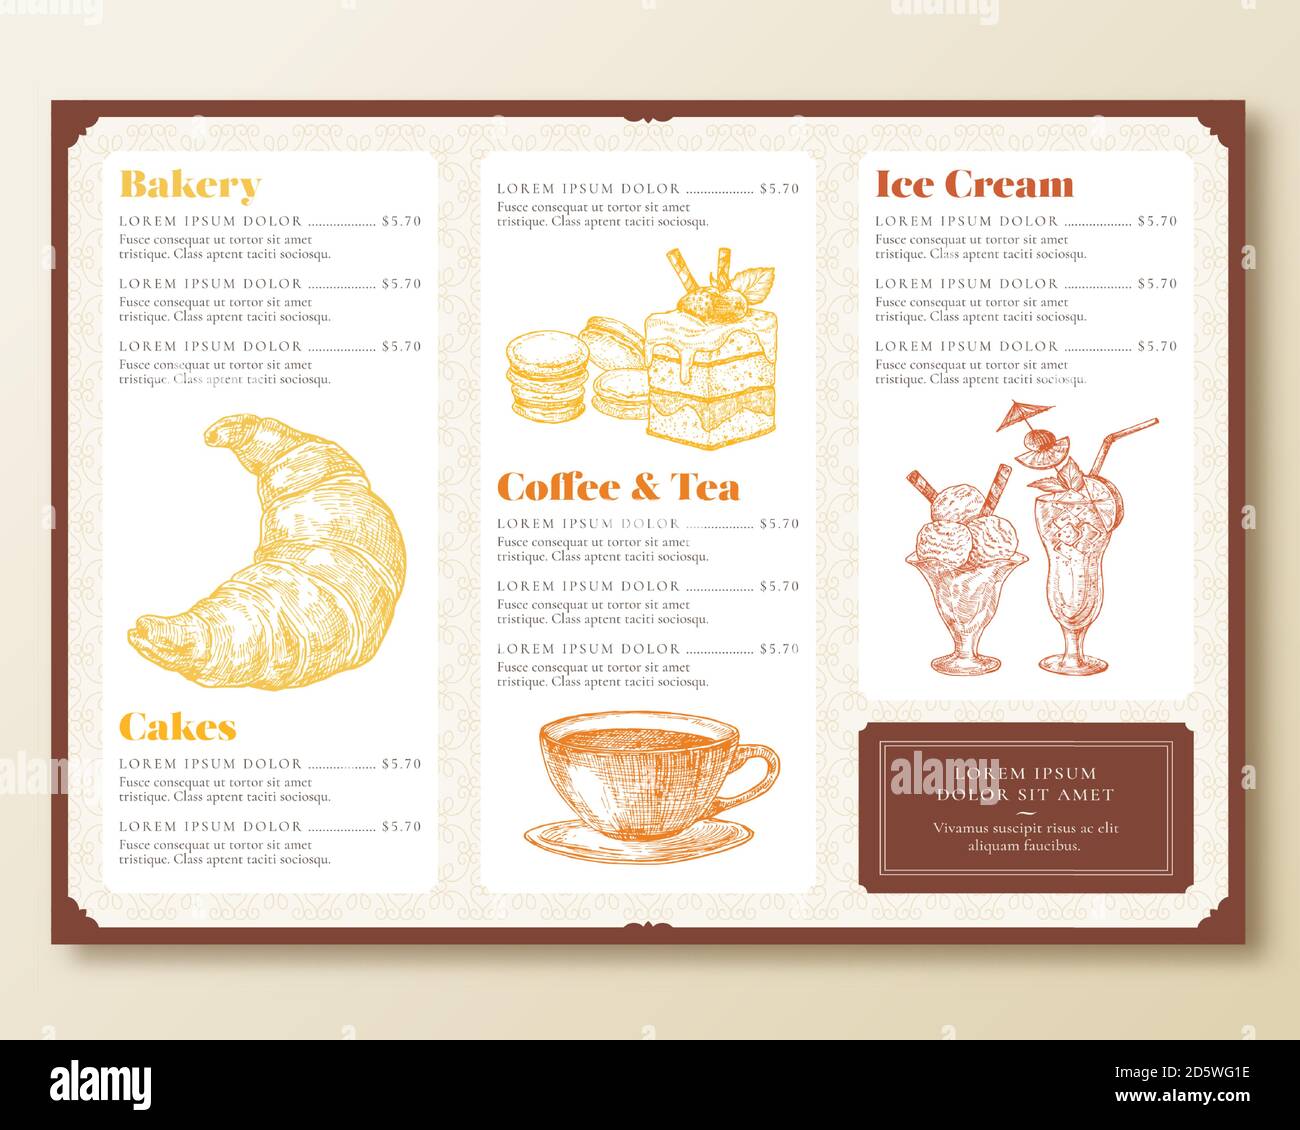 Restaurant Or Cafe Menu Template Retro Style Design Layout With Hand Drawn Croissant Cake Ice Cream And Coffee Cup Sketches Food And Beverages Stock Vector Image Art Alamy